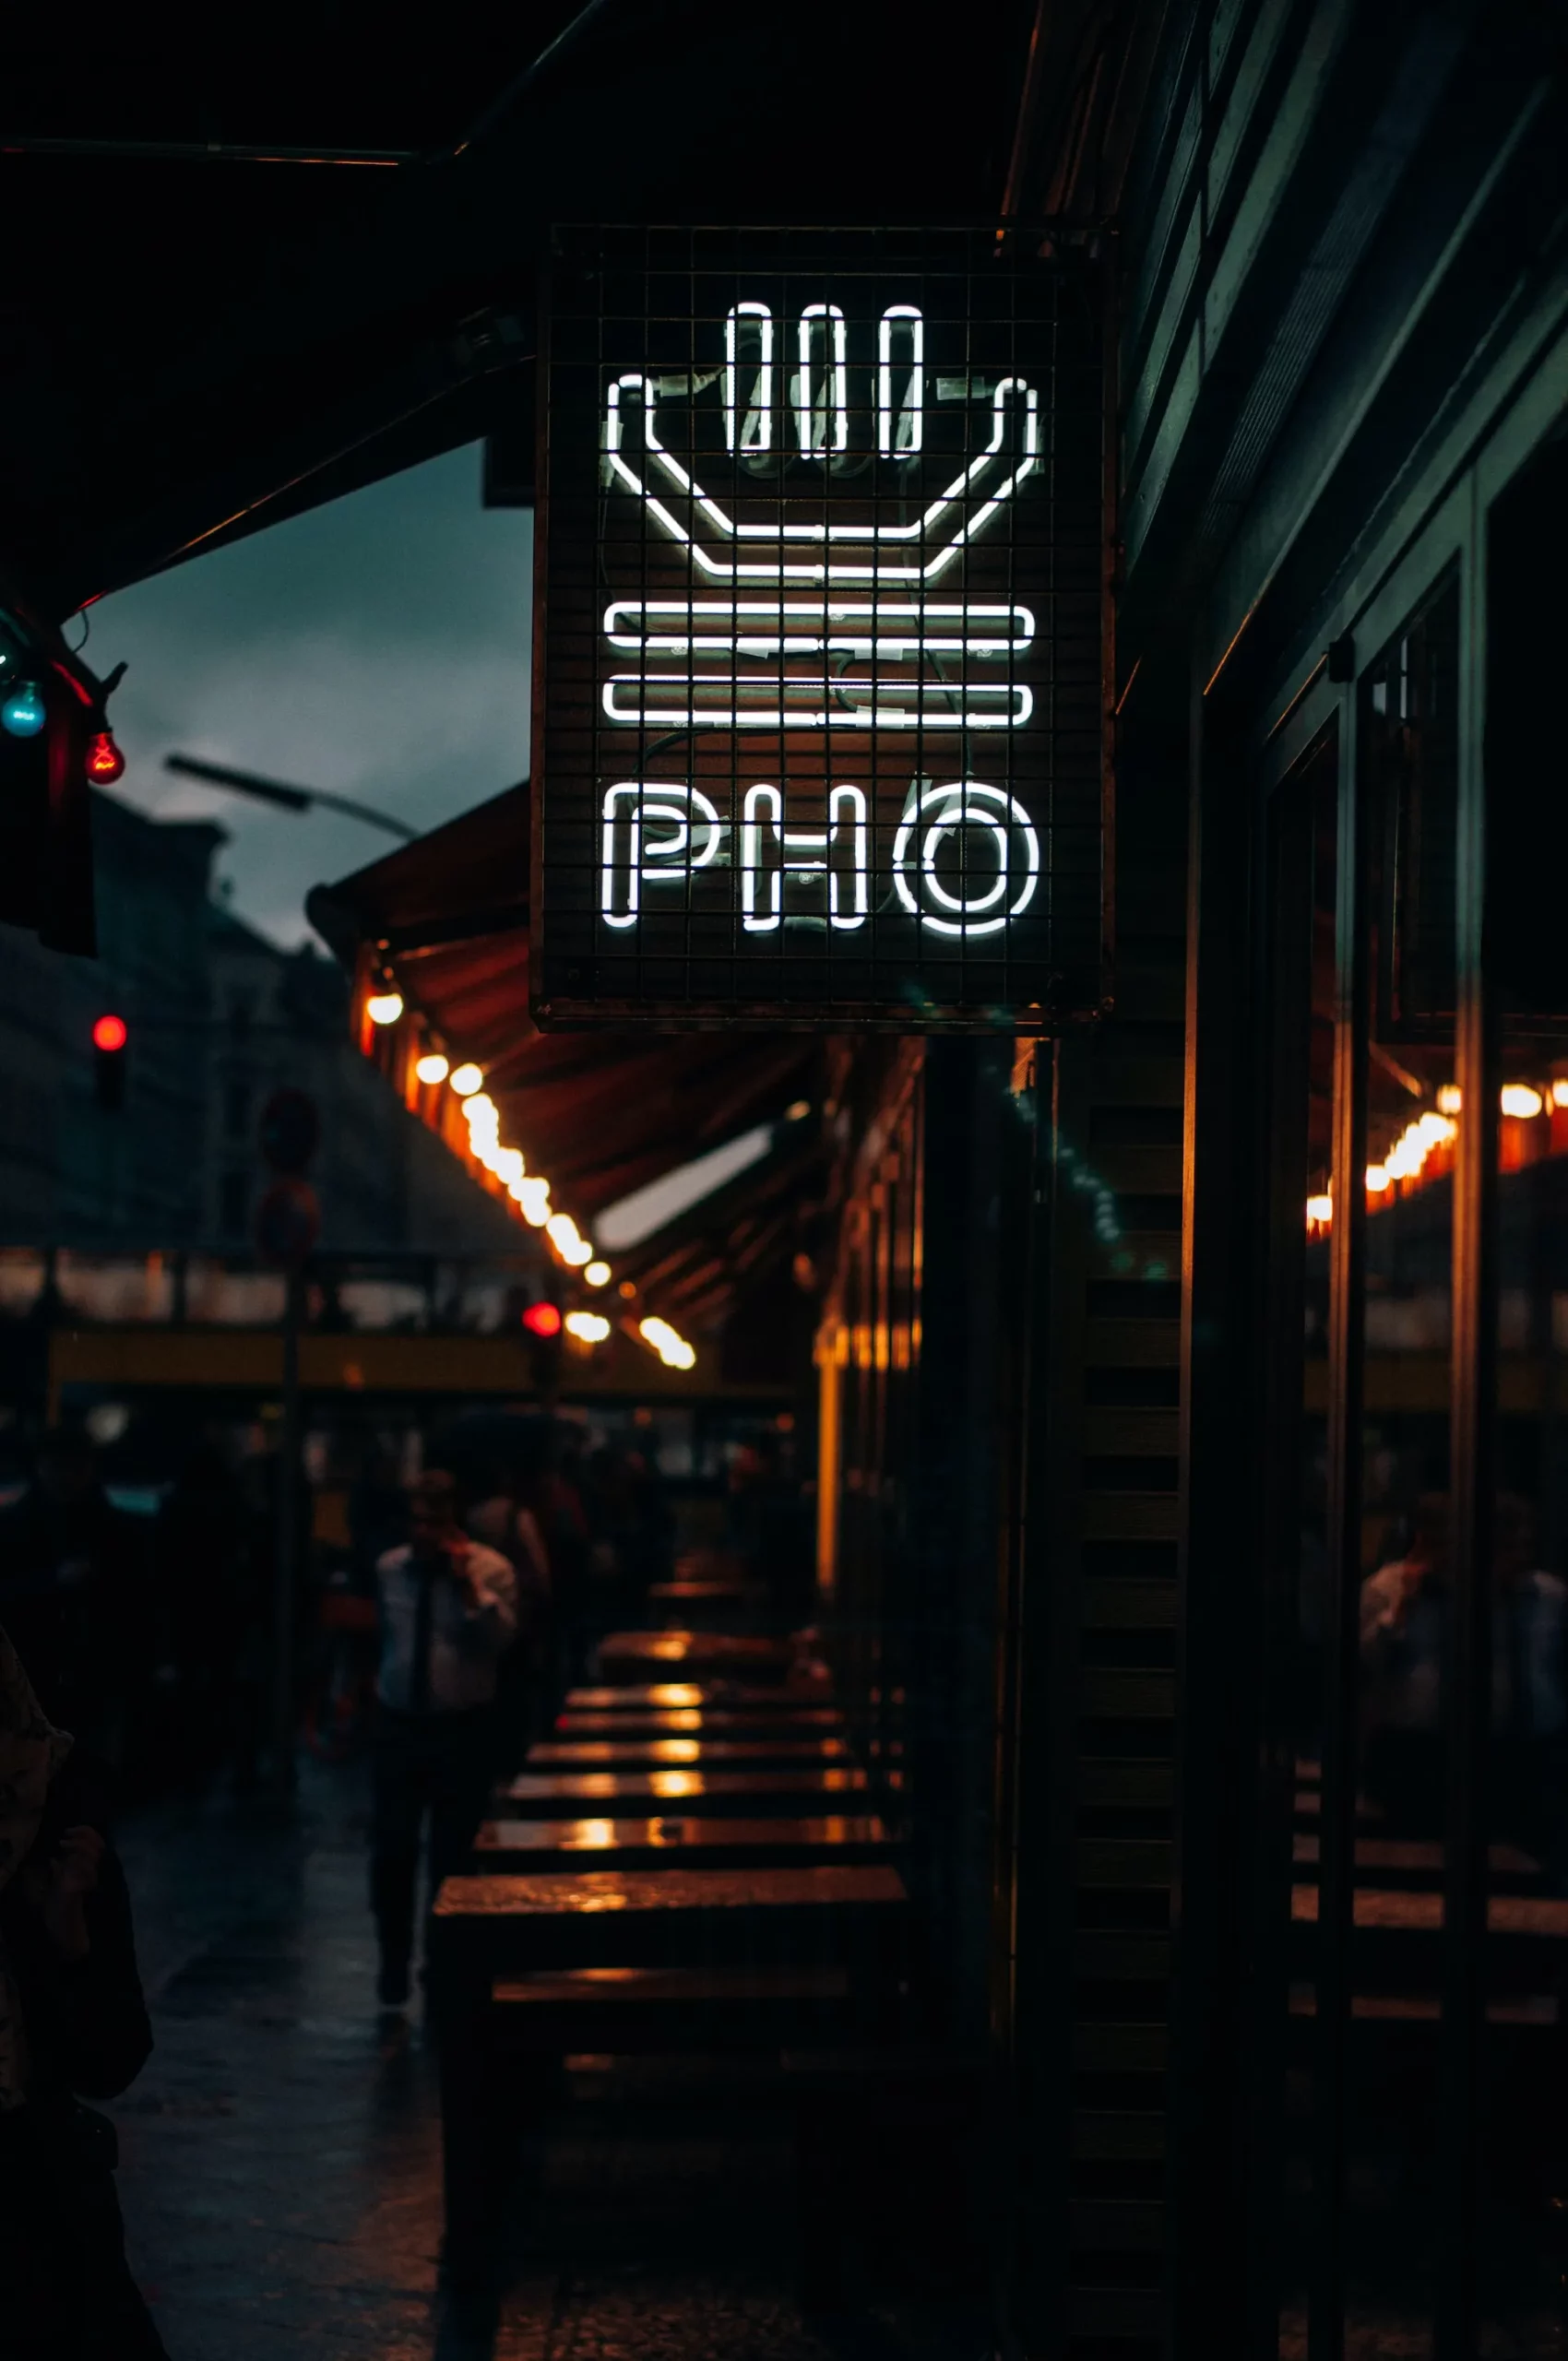 A lit up sign that reads "Pho"